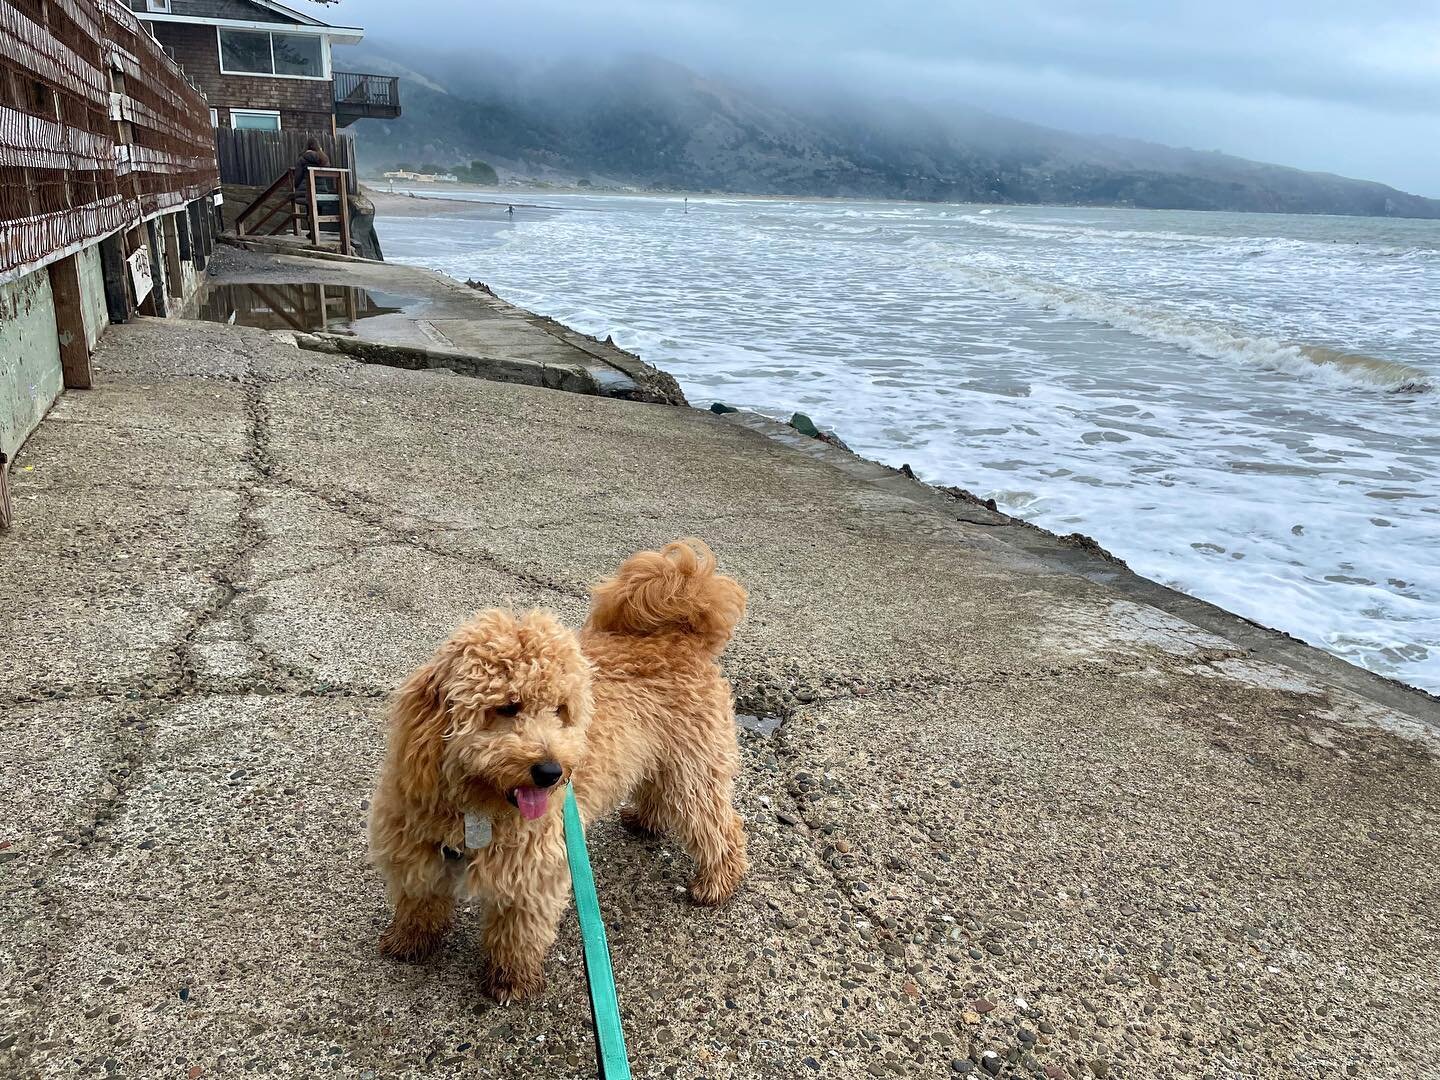 Bo&rsquo;s Bo surf report for Wednesday: conditions are way suboptimal today. But I did enjoy barking (foolishly) at that coyote on the way to the beach. #surf #surfing #westmarin